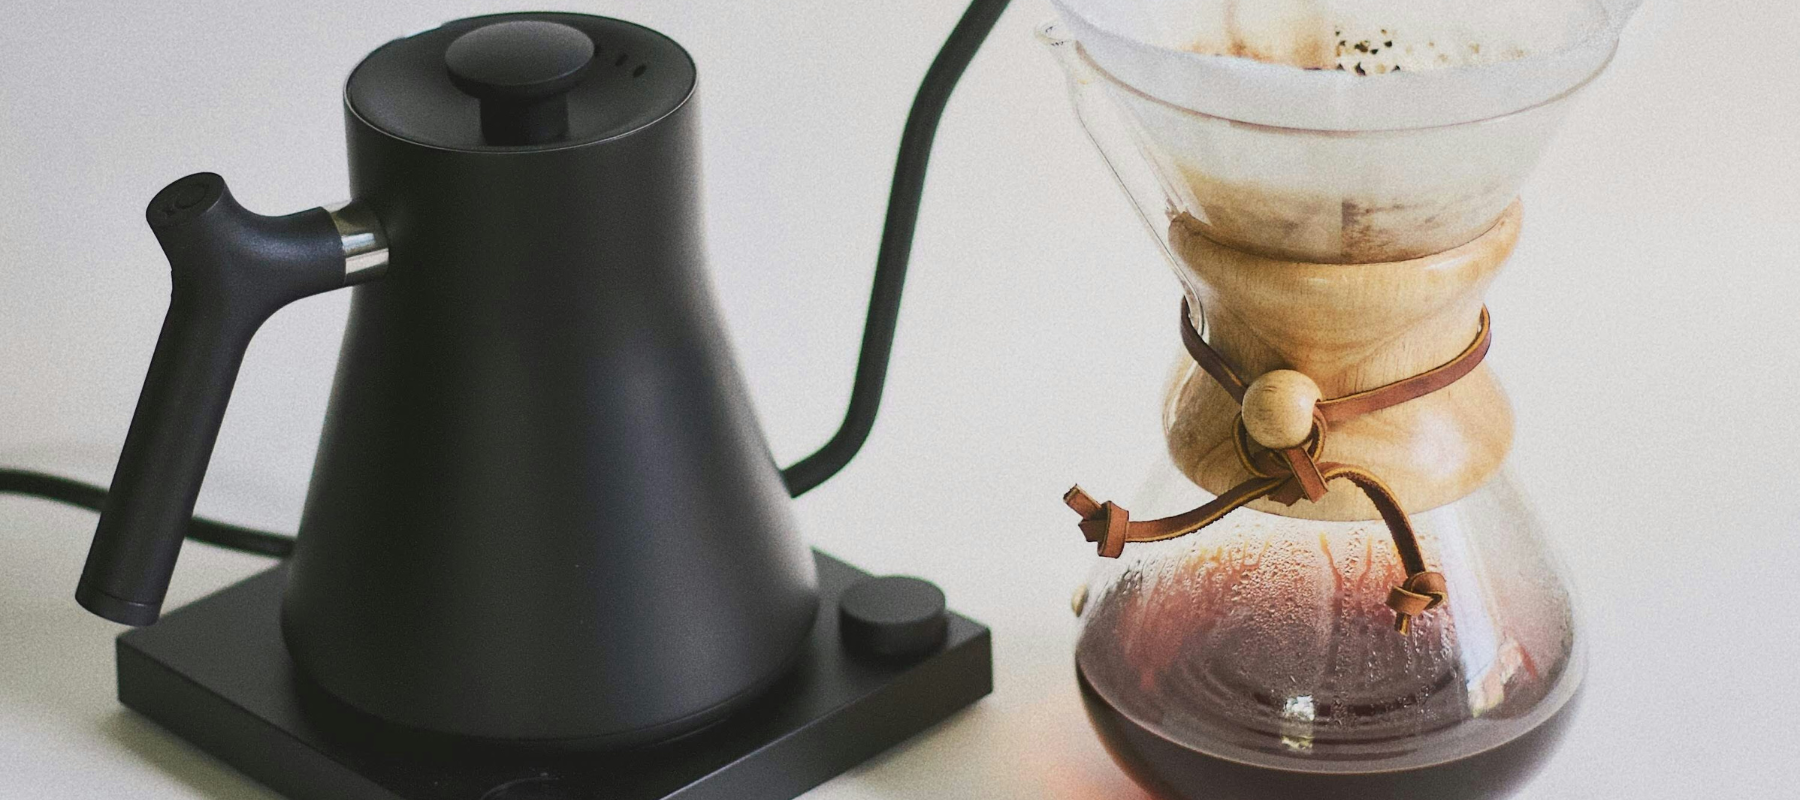 chemex brewer with a gooseneck kettle